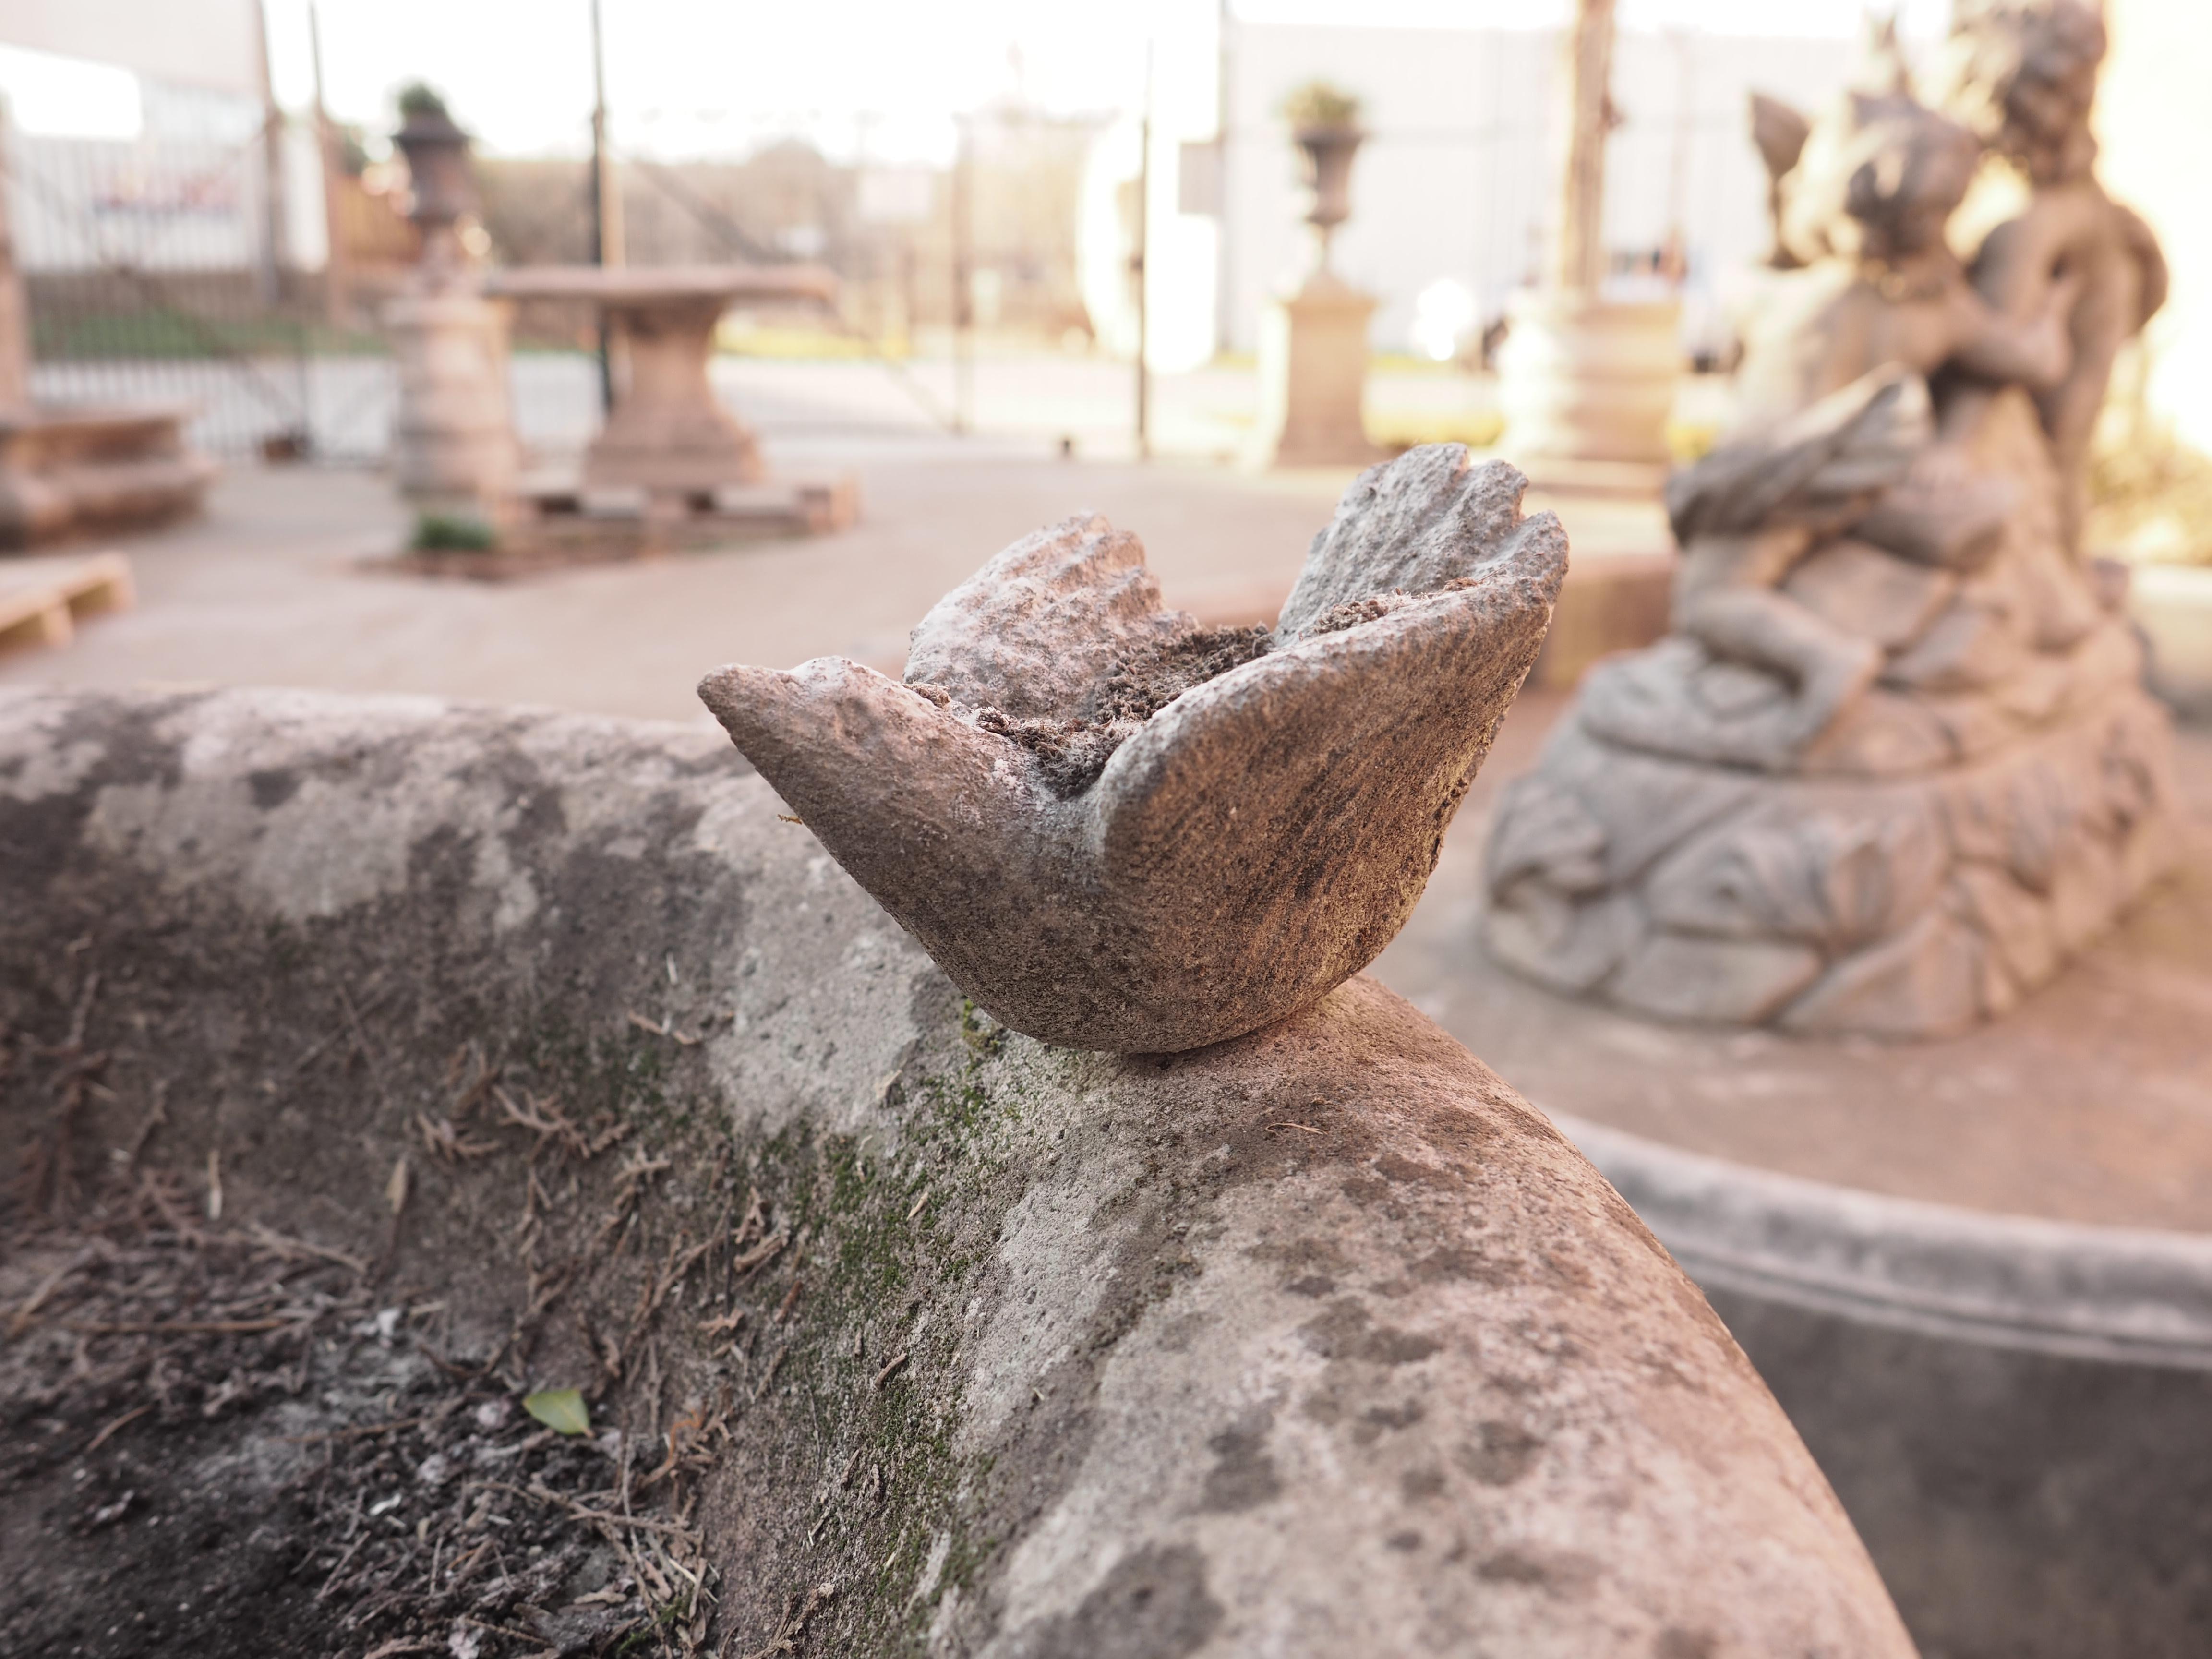 This charming birdbath was hand-carved from Northern Italian limestone and features a detachable carved bird. A metal dowel affixed to the underside of the small bird slots into a hole on top of the 24” diameter basin. The rim of the bowl has